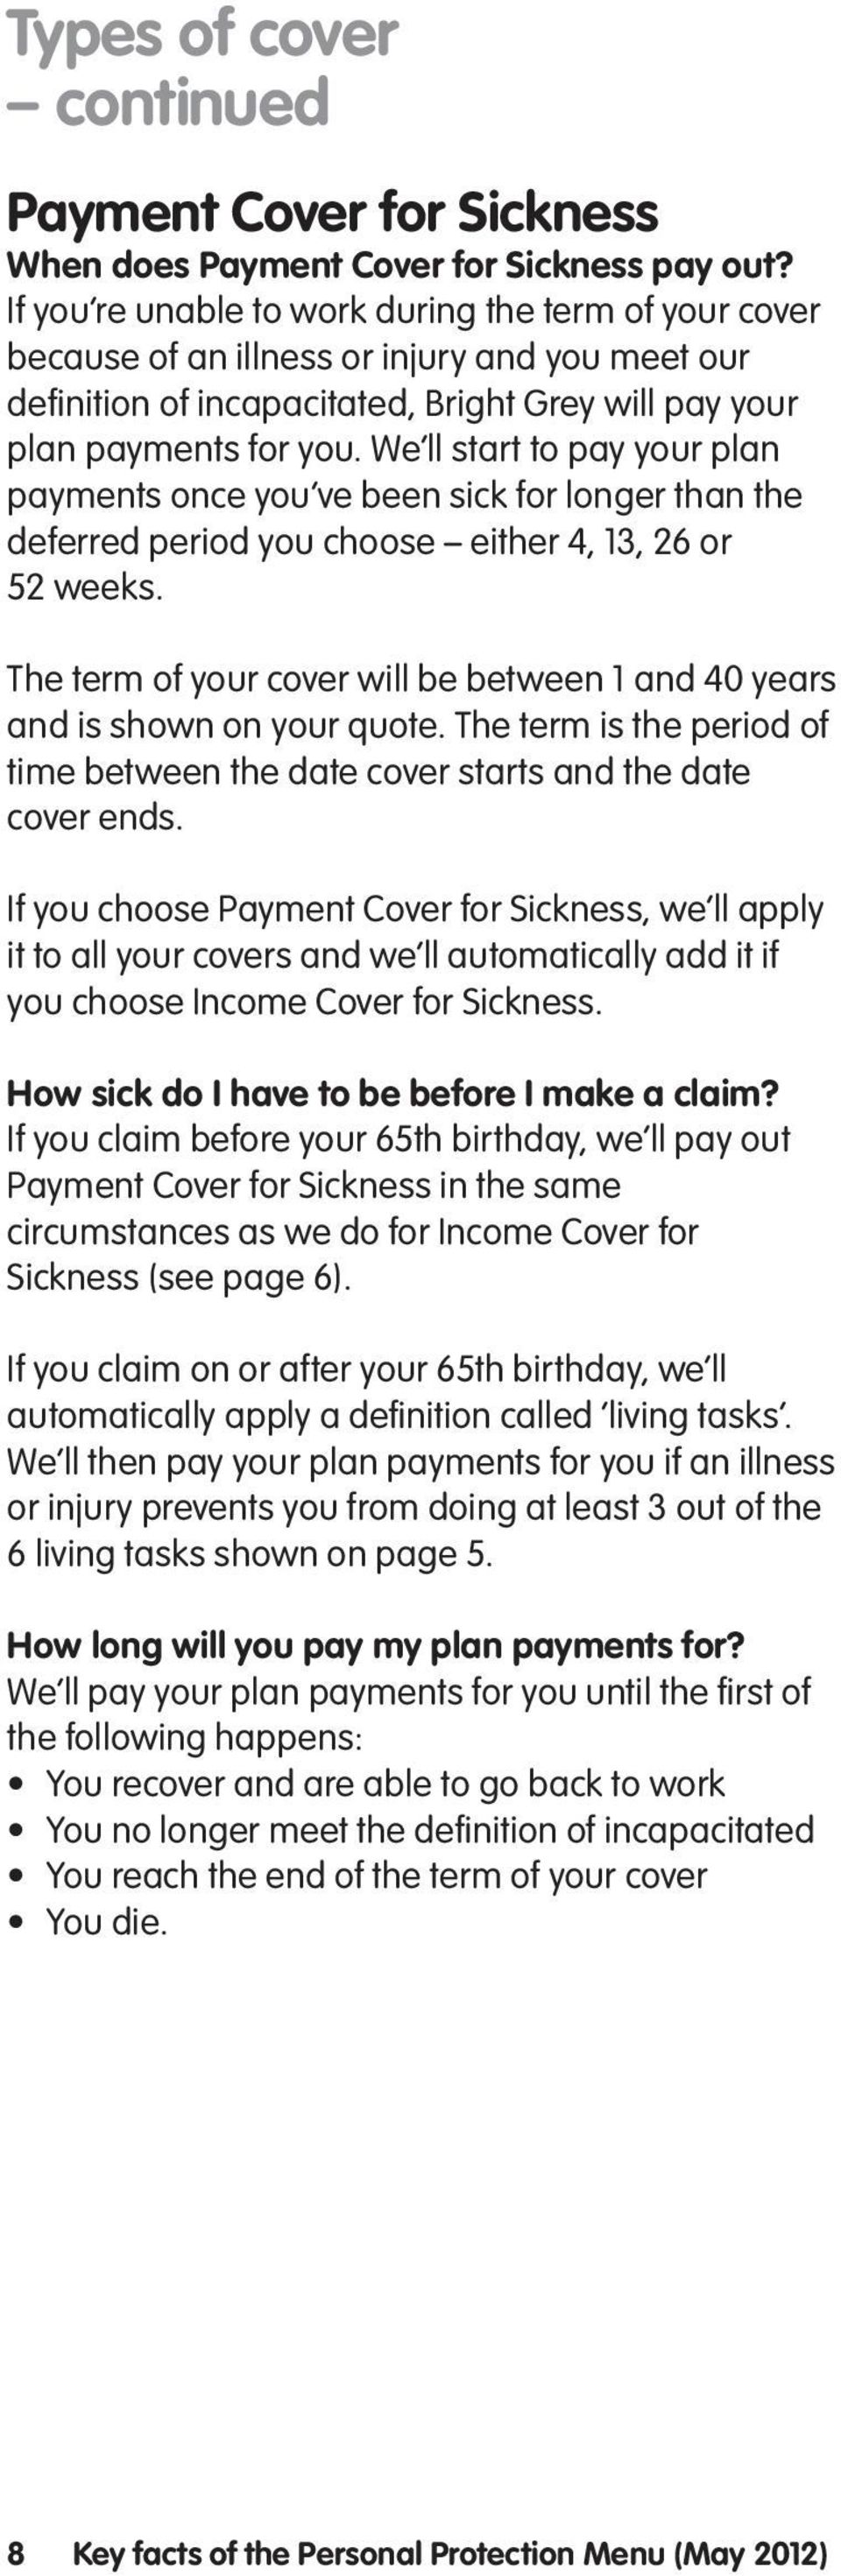 We ll start to pay your plan payments once you ve been sick for longer than the deferred period you choose either 4, 13, 26 or 52 weeks.